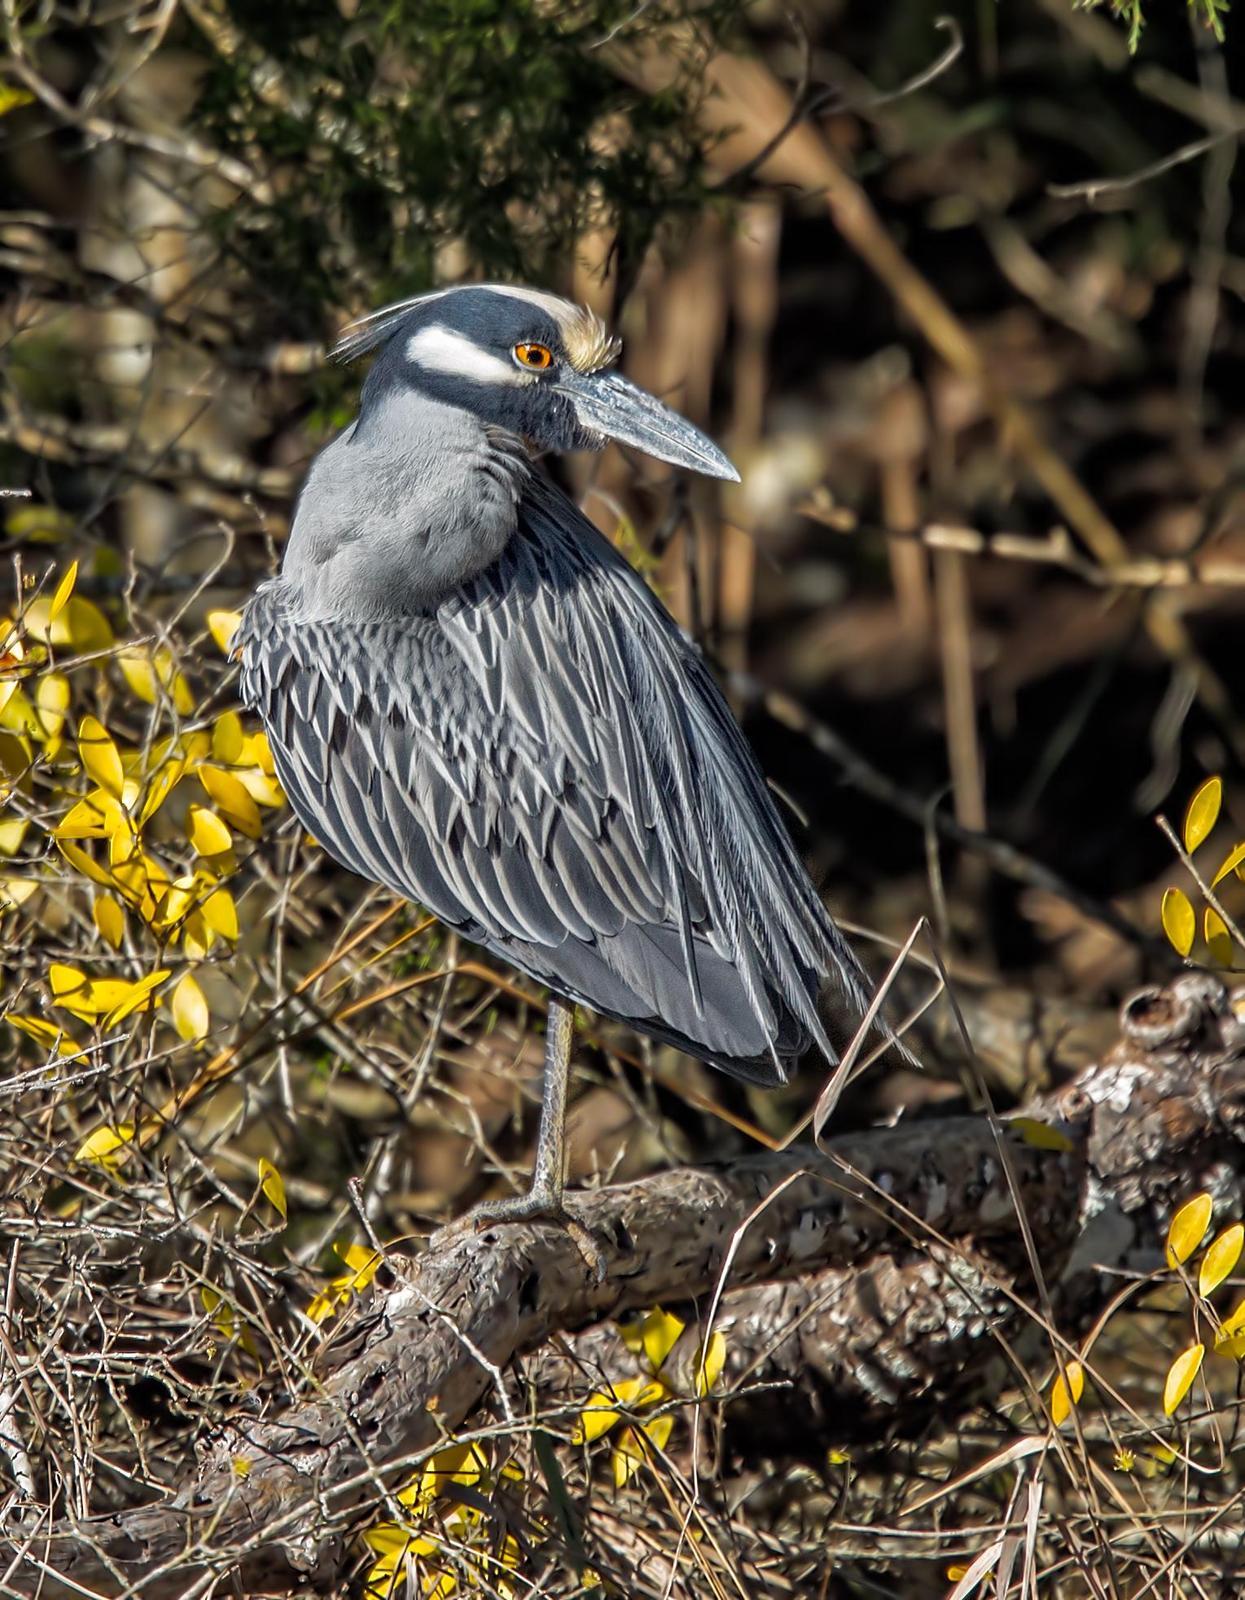 Yellow-crowned Night-Heron Photo by JC Knoll